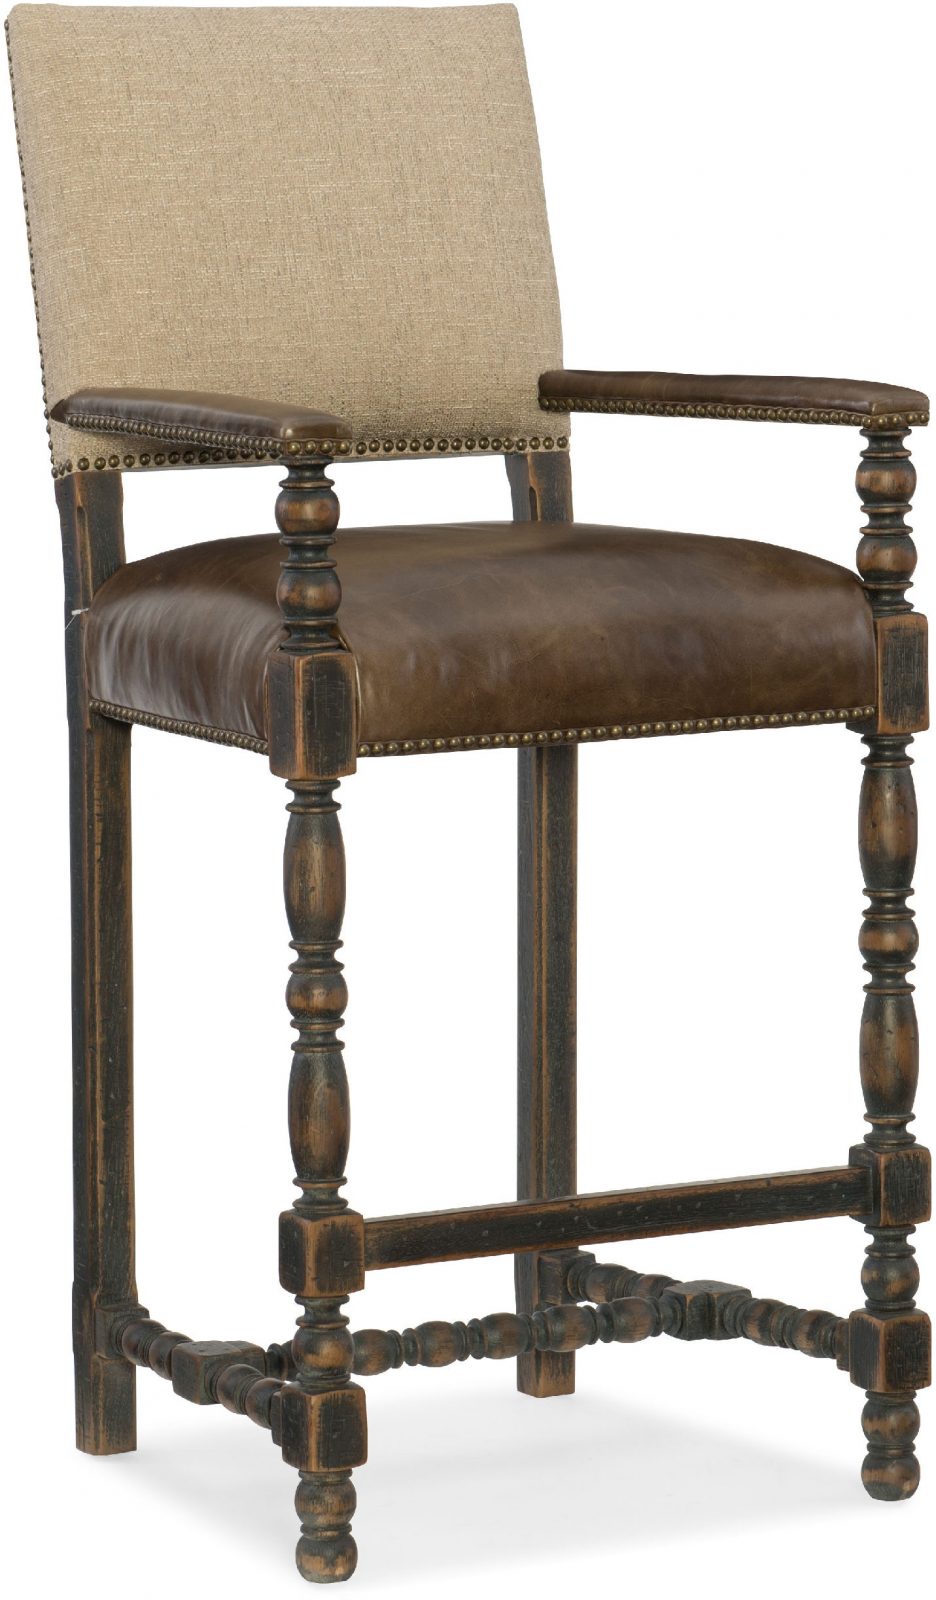 Hill Country Comfort bar stool